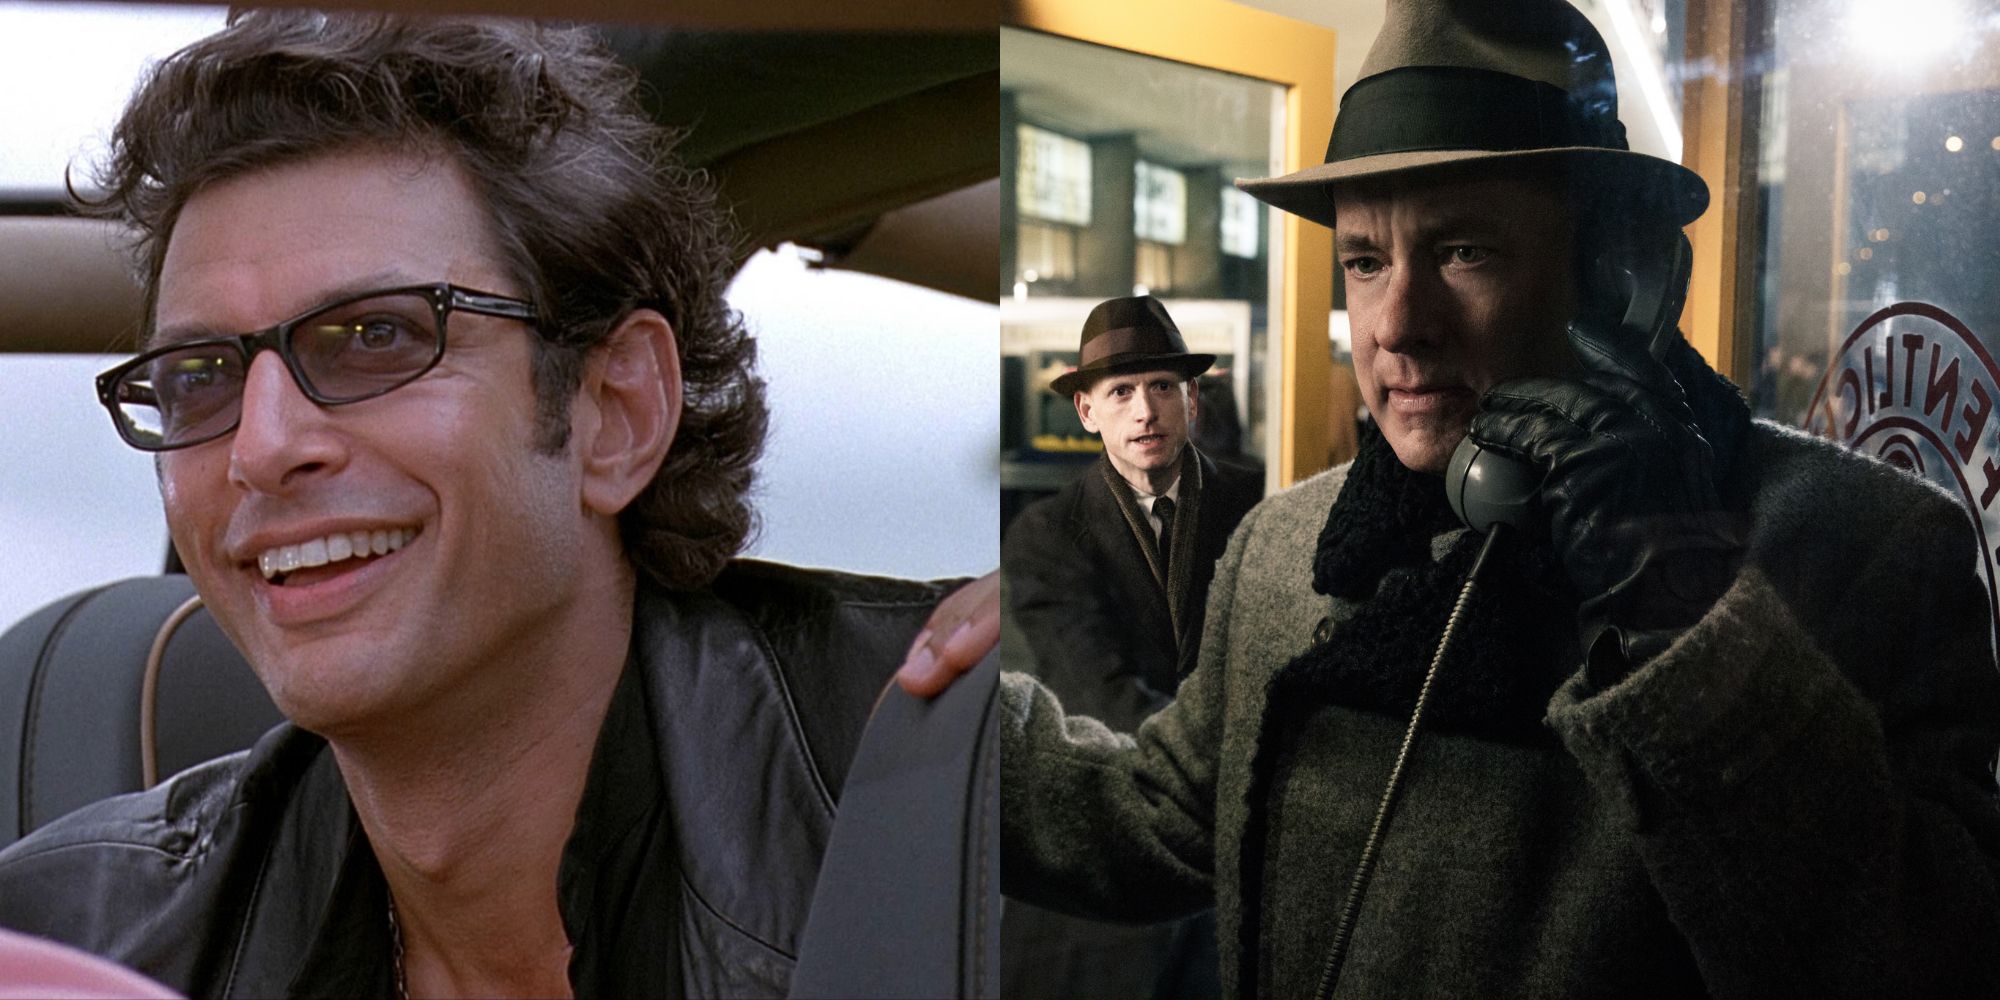 Ian Malcolm in Jurassic Park and James Donovan in Bridge of Spies.